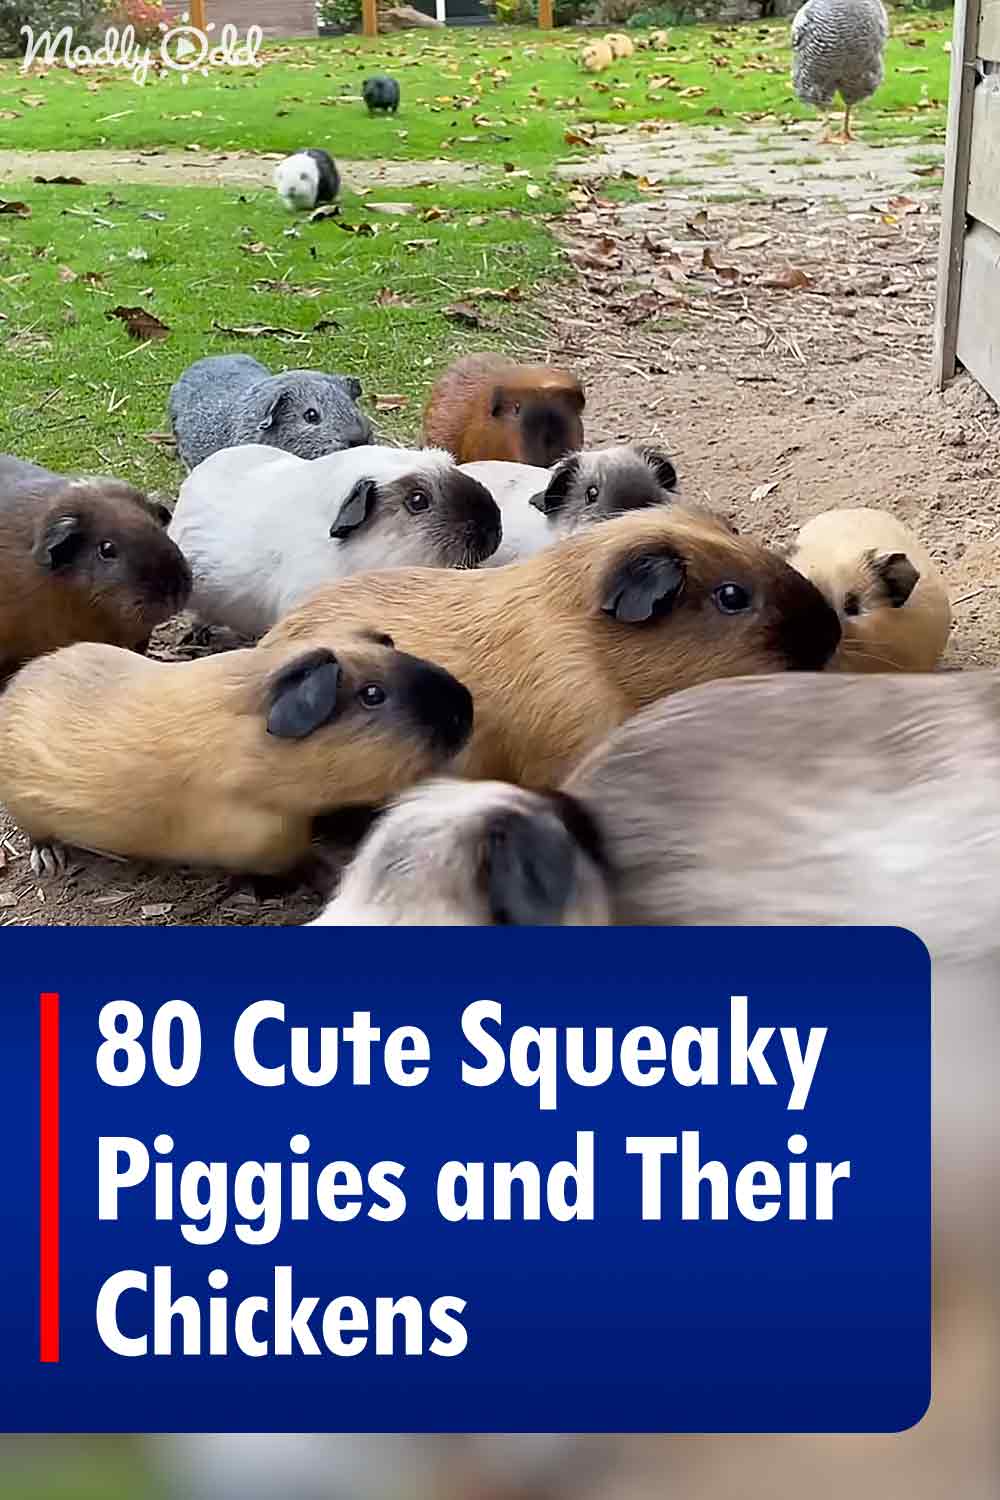 80 Cute Squeaky Piggies and Their Chickens